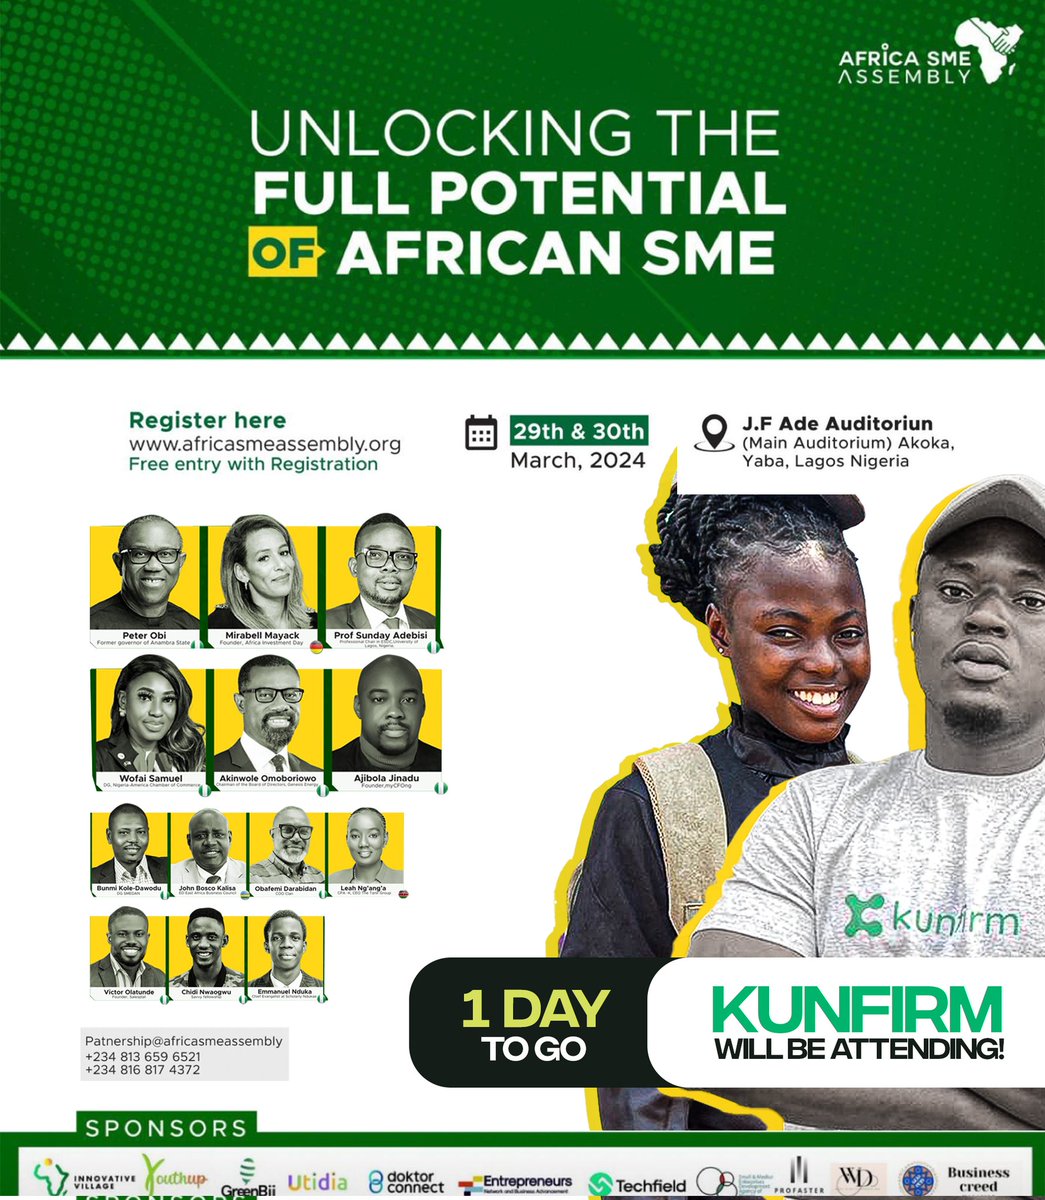 Just 1 day left until #UnlockingTheFullPotential of African SME event! We're looking forward to meeting you & contributing to a thriving African SME ecosystem. #SMEs #Lagos #SmallBusiness